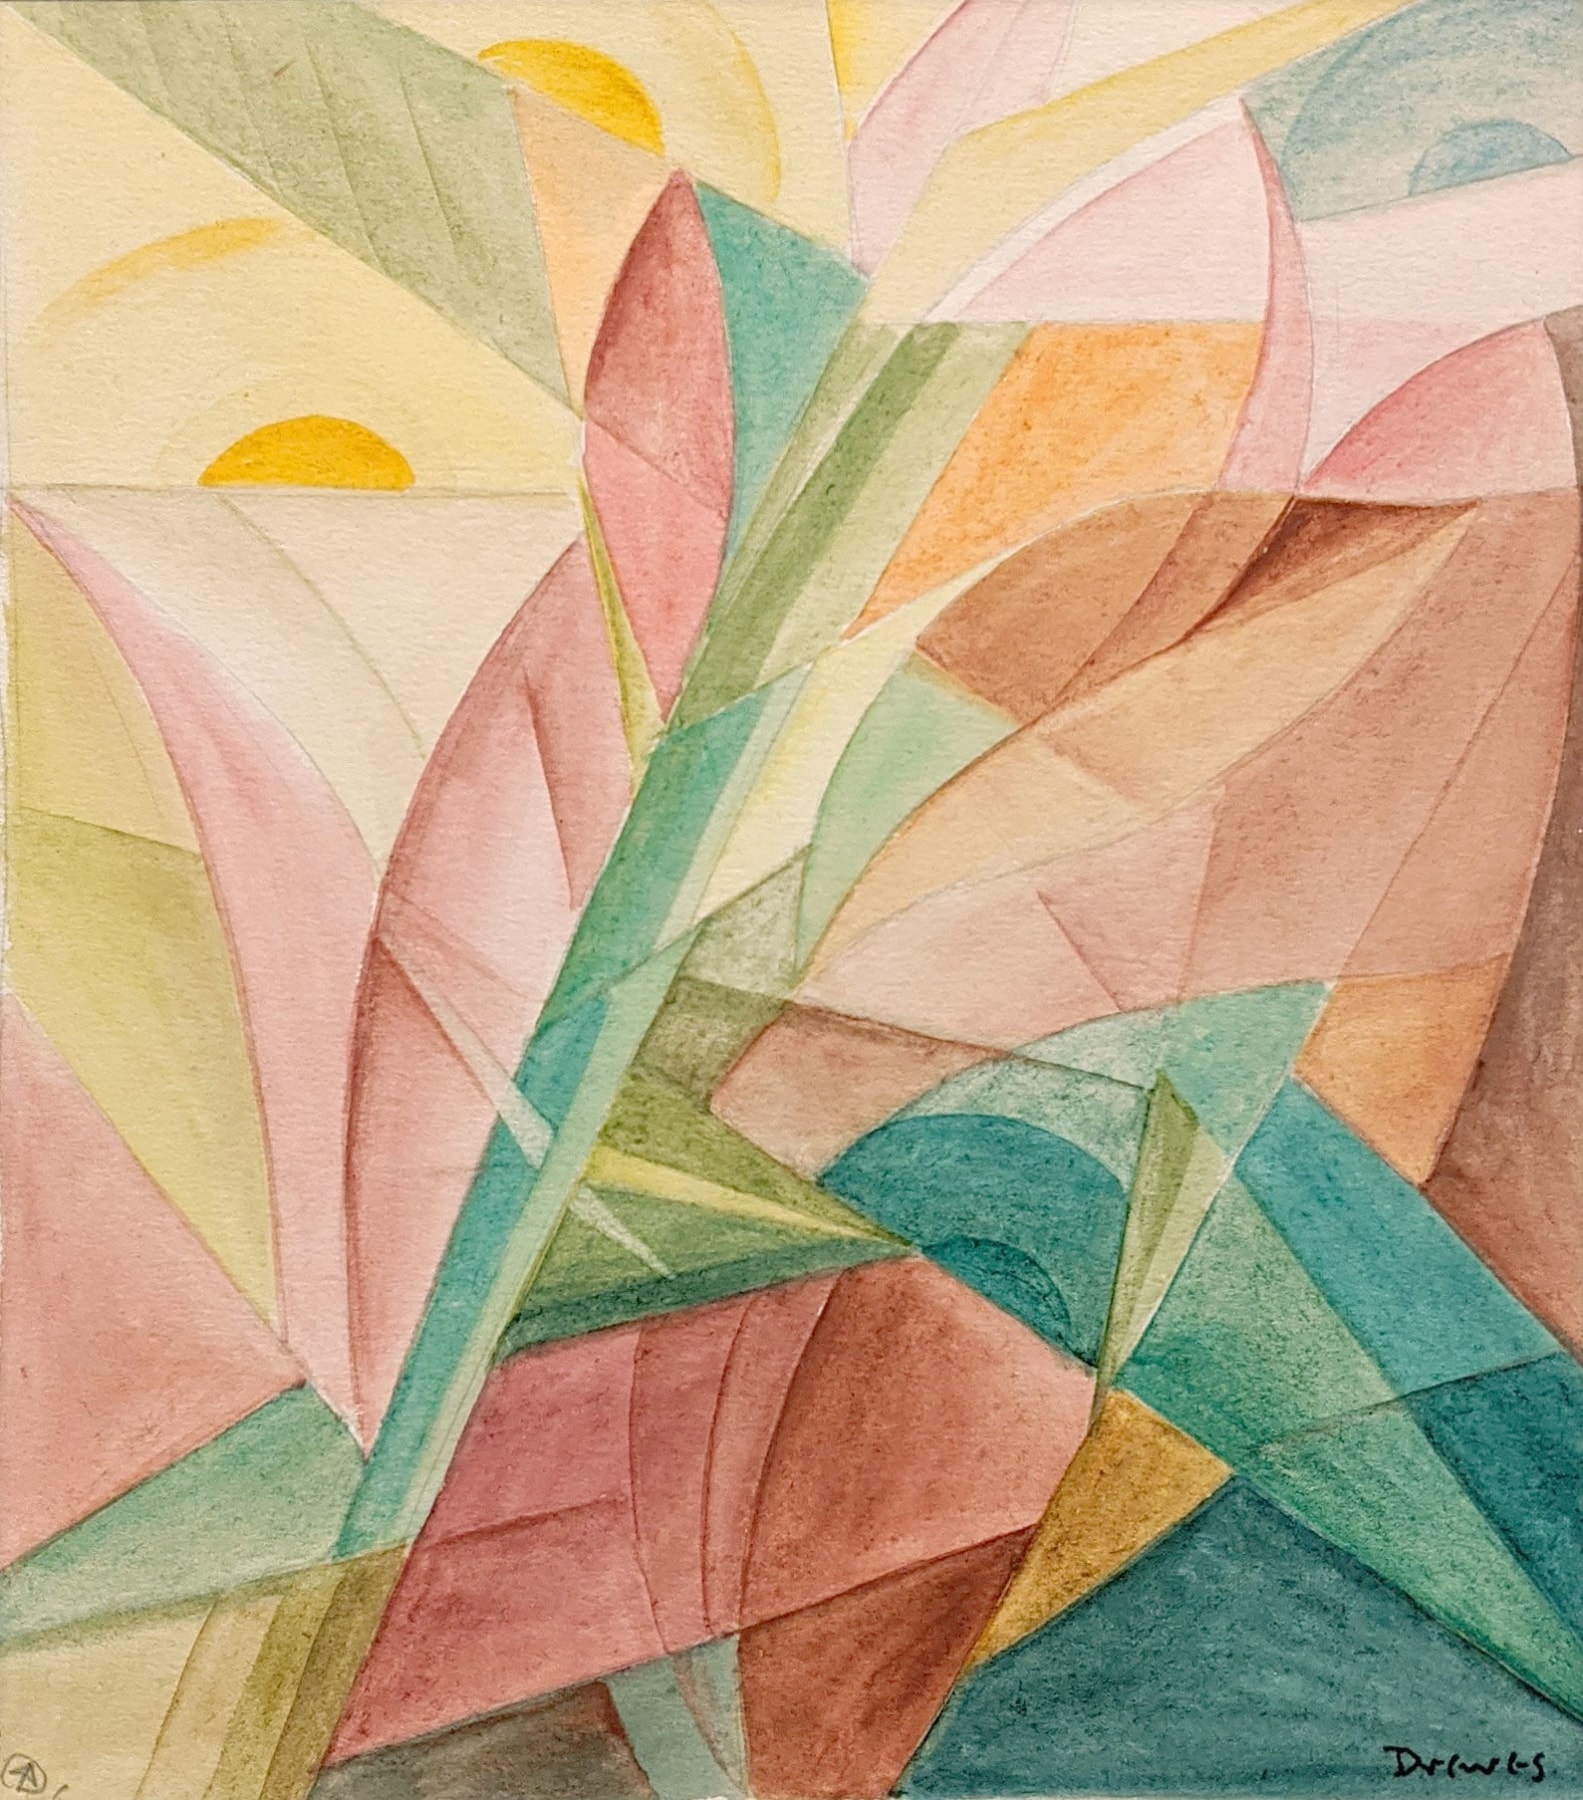 WERNER DREWES (1899-1985), Light and Plant Forms, 1926